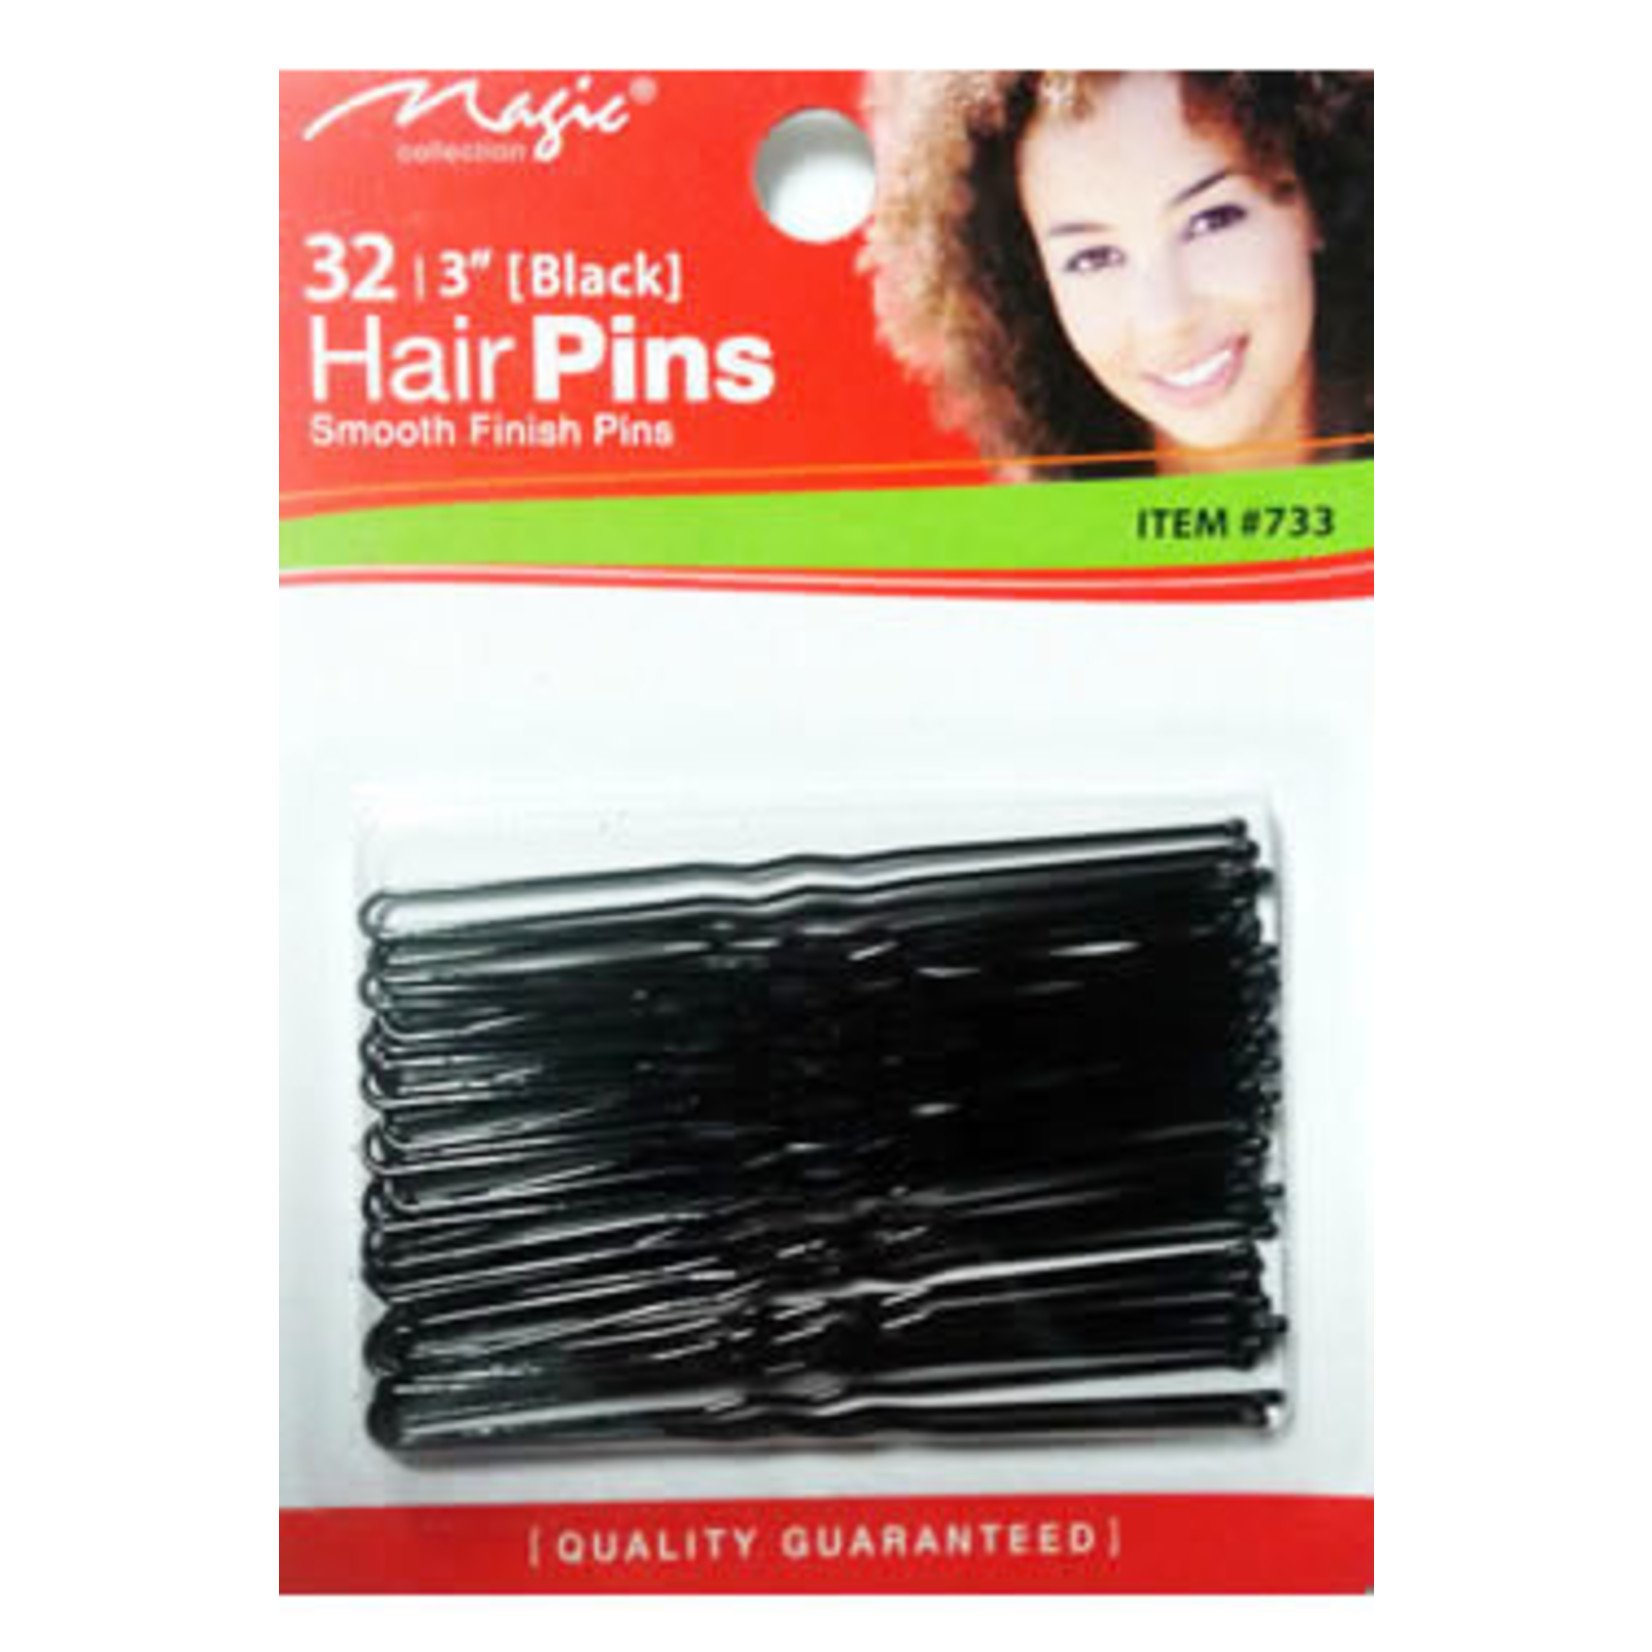 MAGIC COLLECTION MAGIC COLLECTION 3 INCH HAIR PINS - BLACK